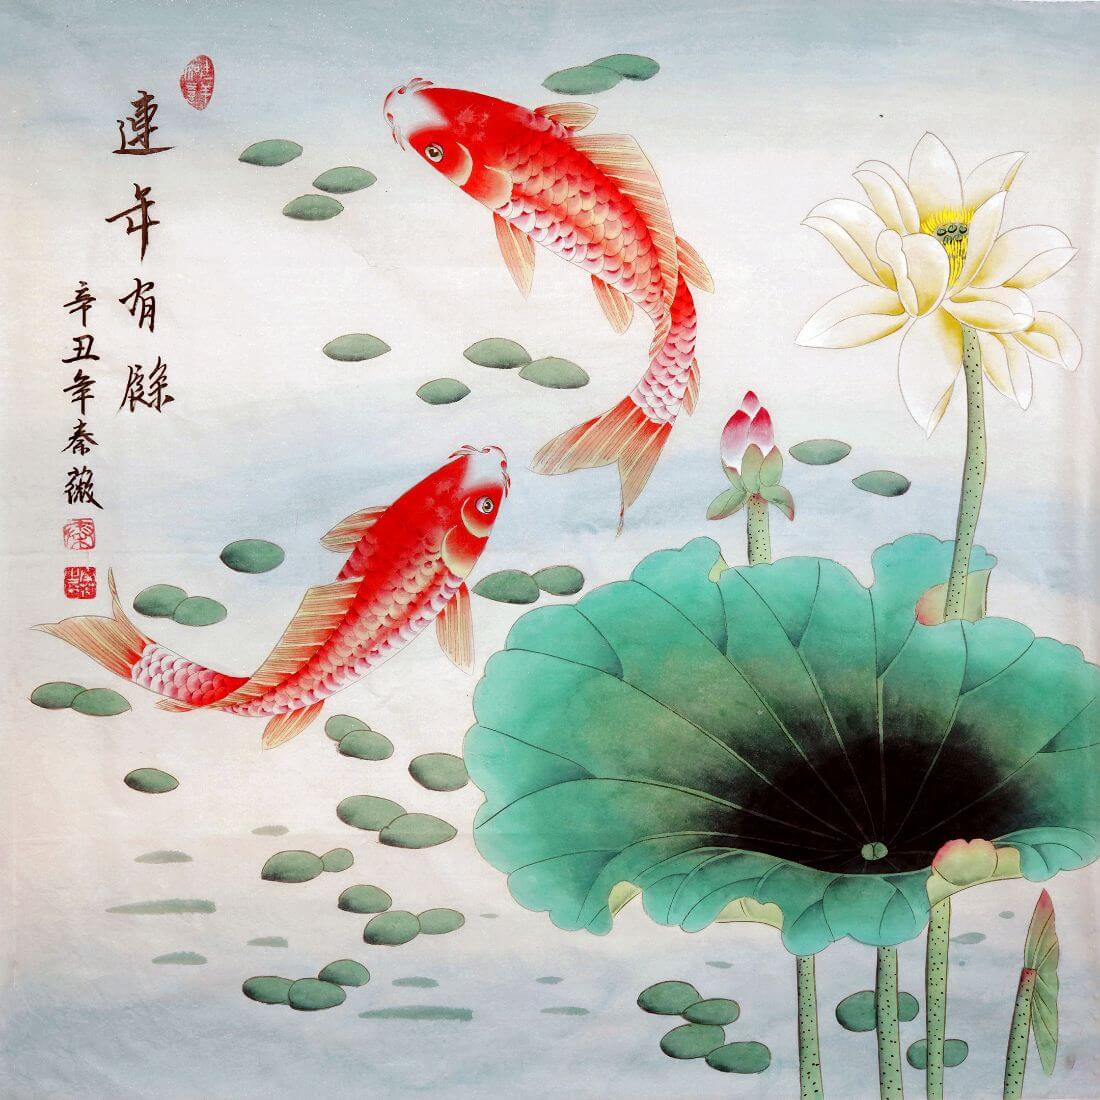 Koi Fish With Lotus - Feng Shui Gongbi Painting - Framed Prints by